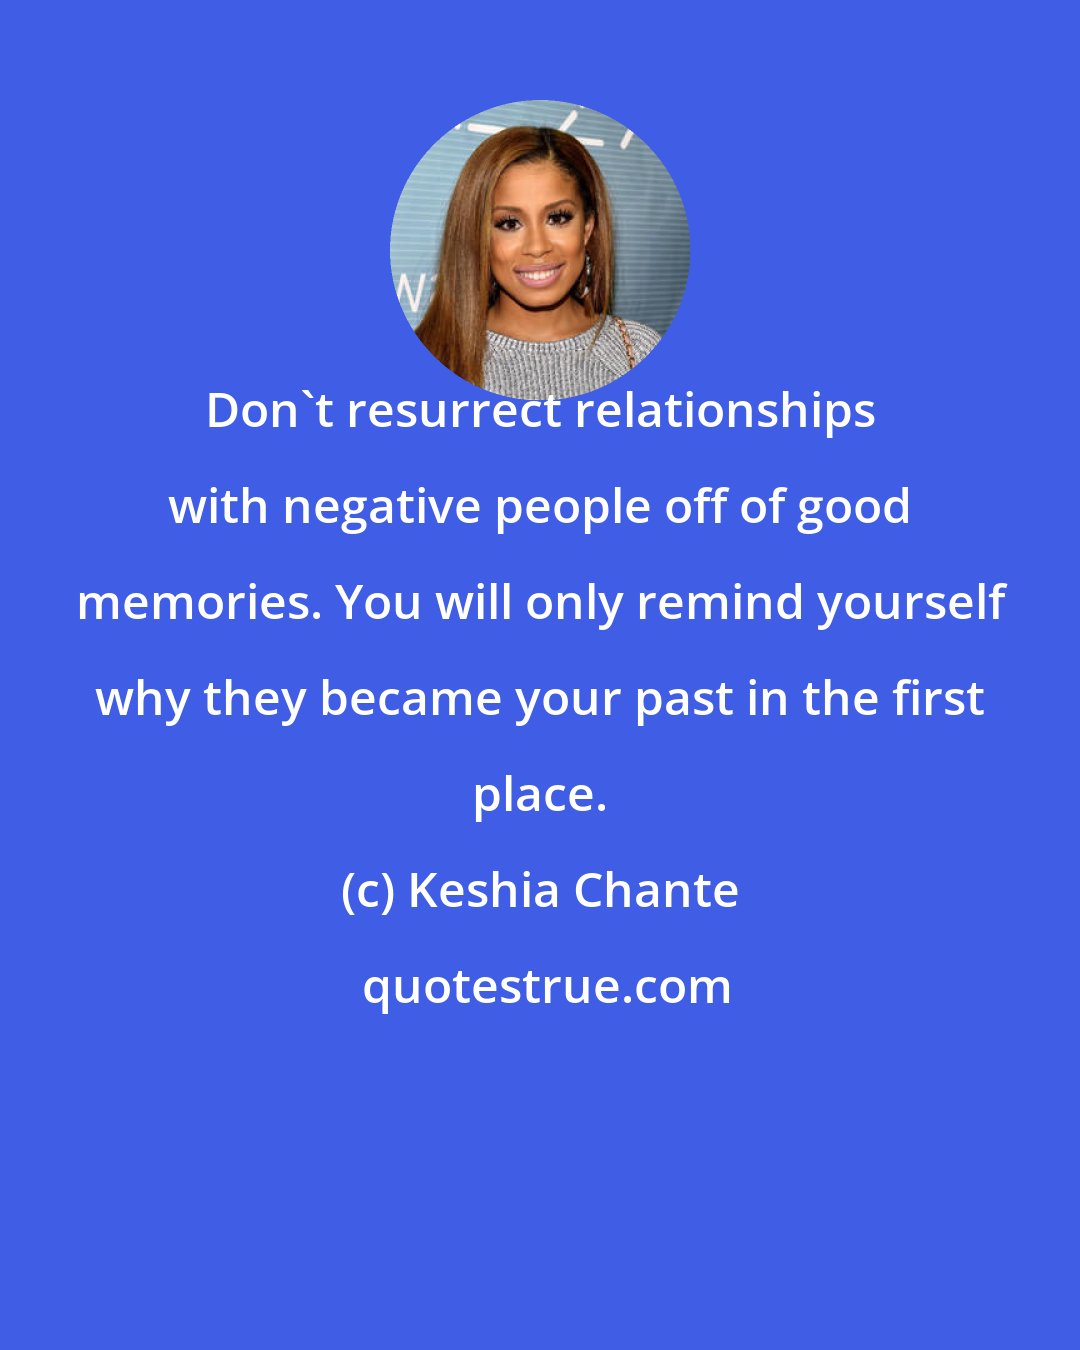 Keshia Chante: Don't resurrect relationships with negative people off of good memories. You will only remind yourself why they became your past in the first place.